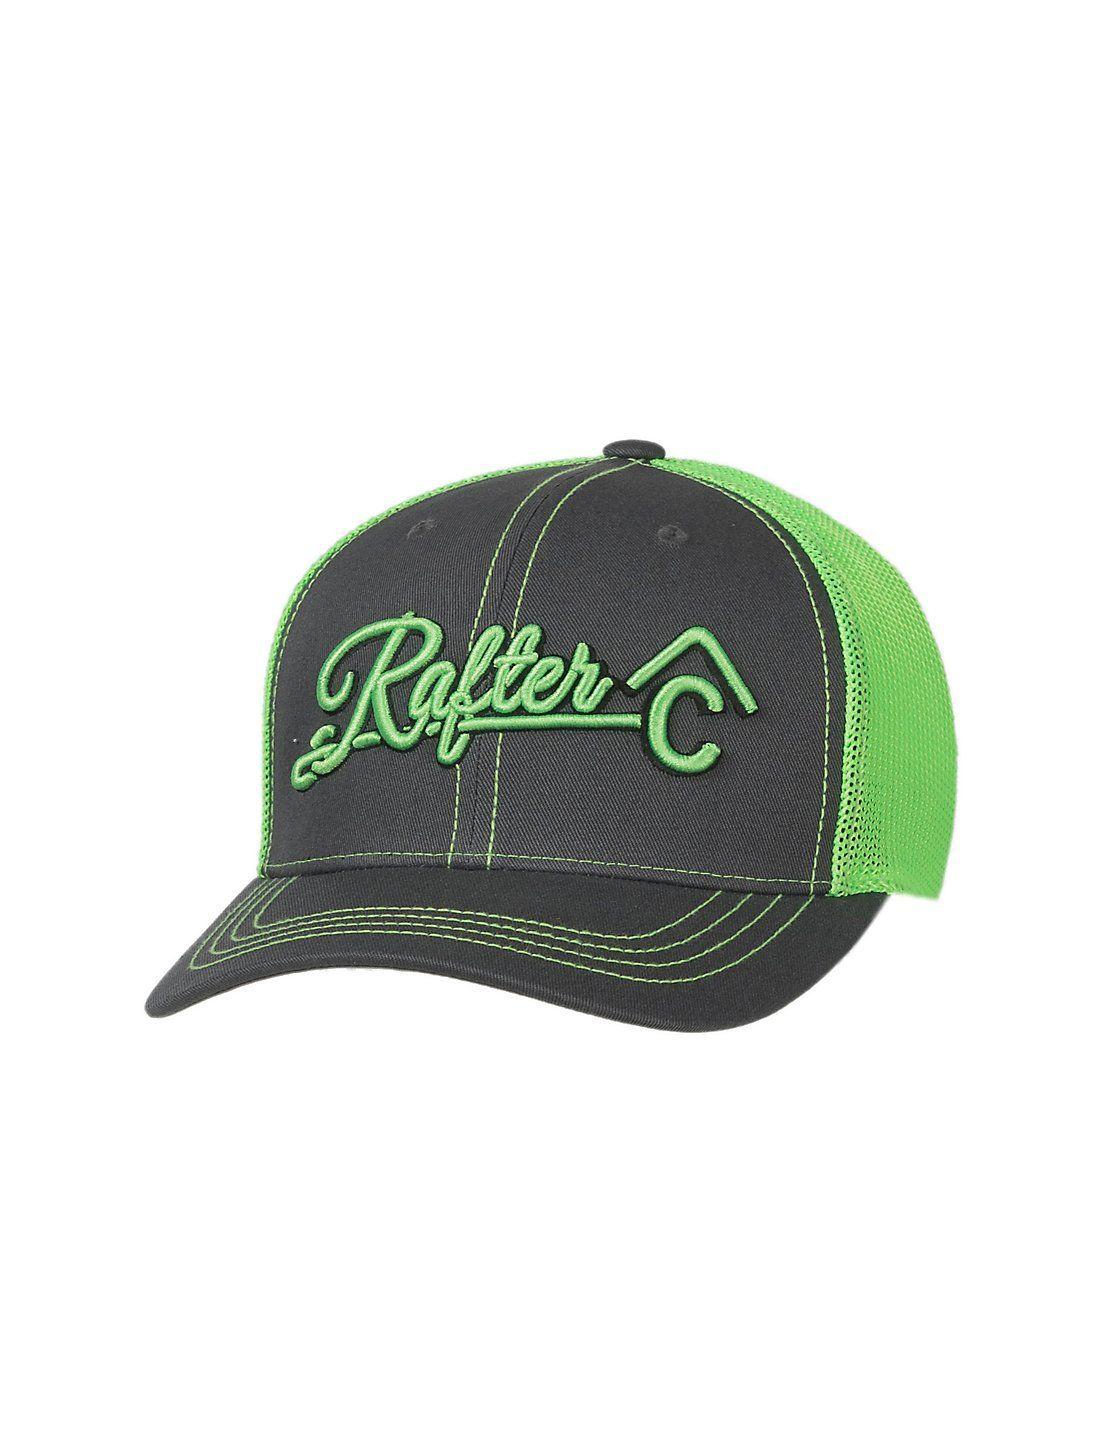 Lime Green C Logo - Rafter C Charcoal with Lime 3D Logo & Mesh Trucker Cap MF1547226